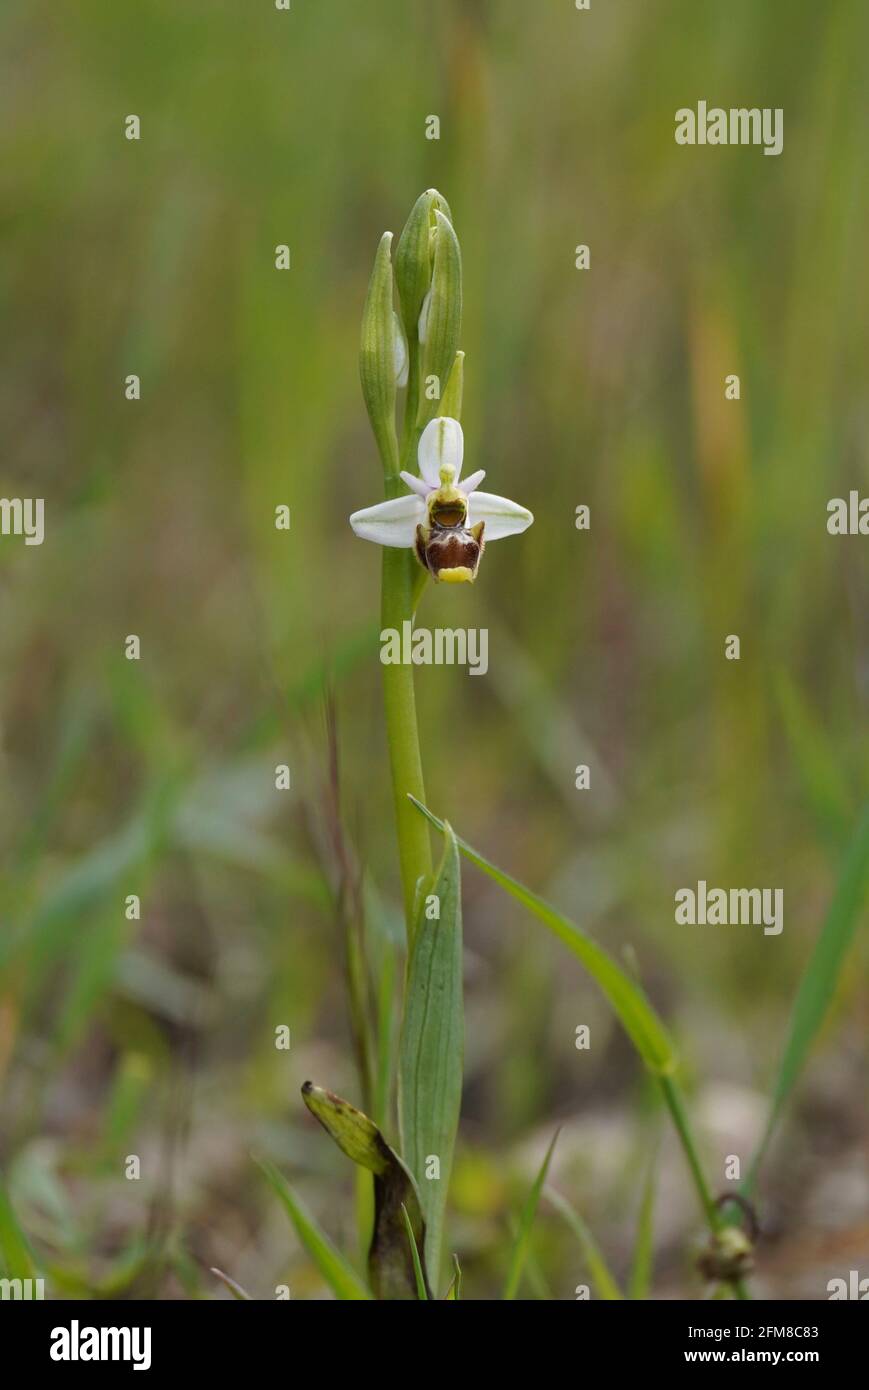 O. scolopax subsp. picta, Ophrys picta, orchidea selvatica, Andalusia, Spagna. Foto Stock